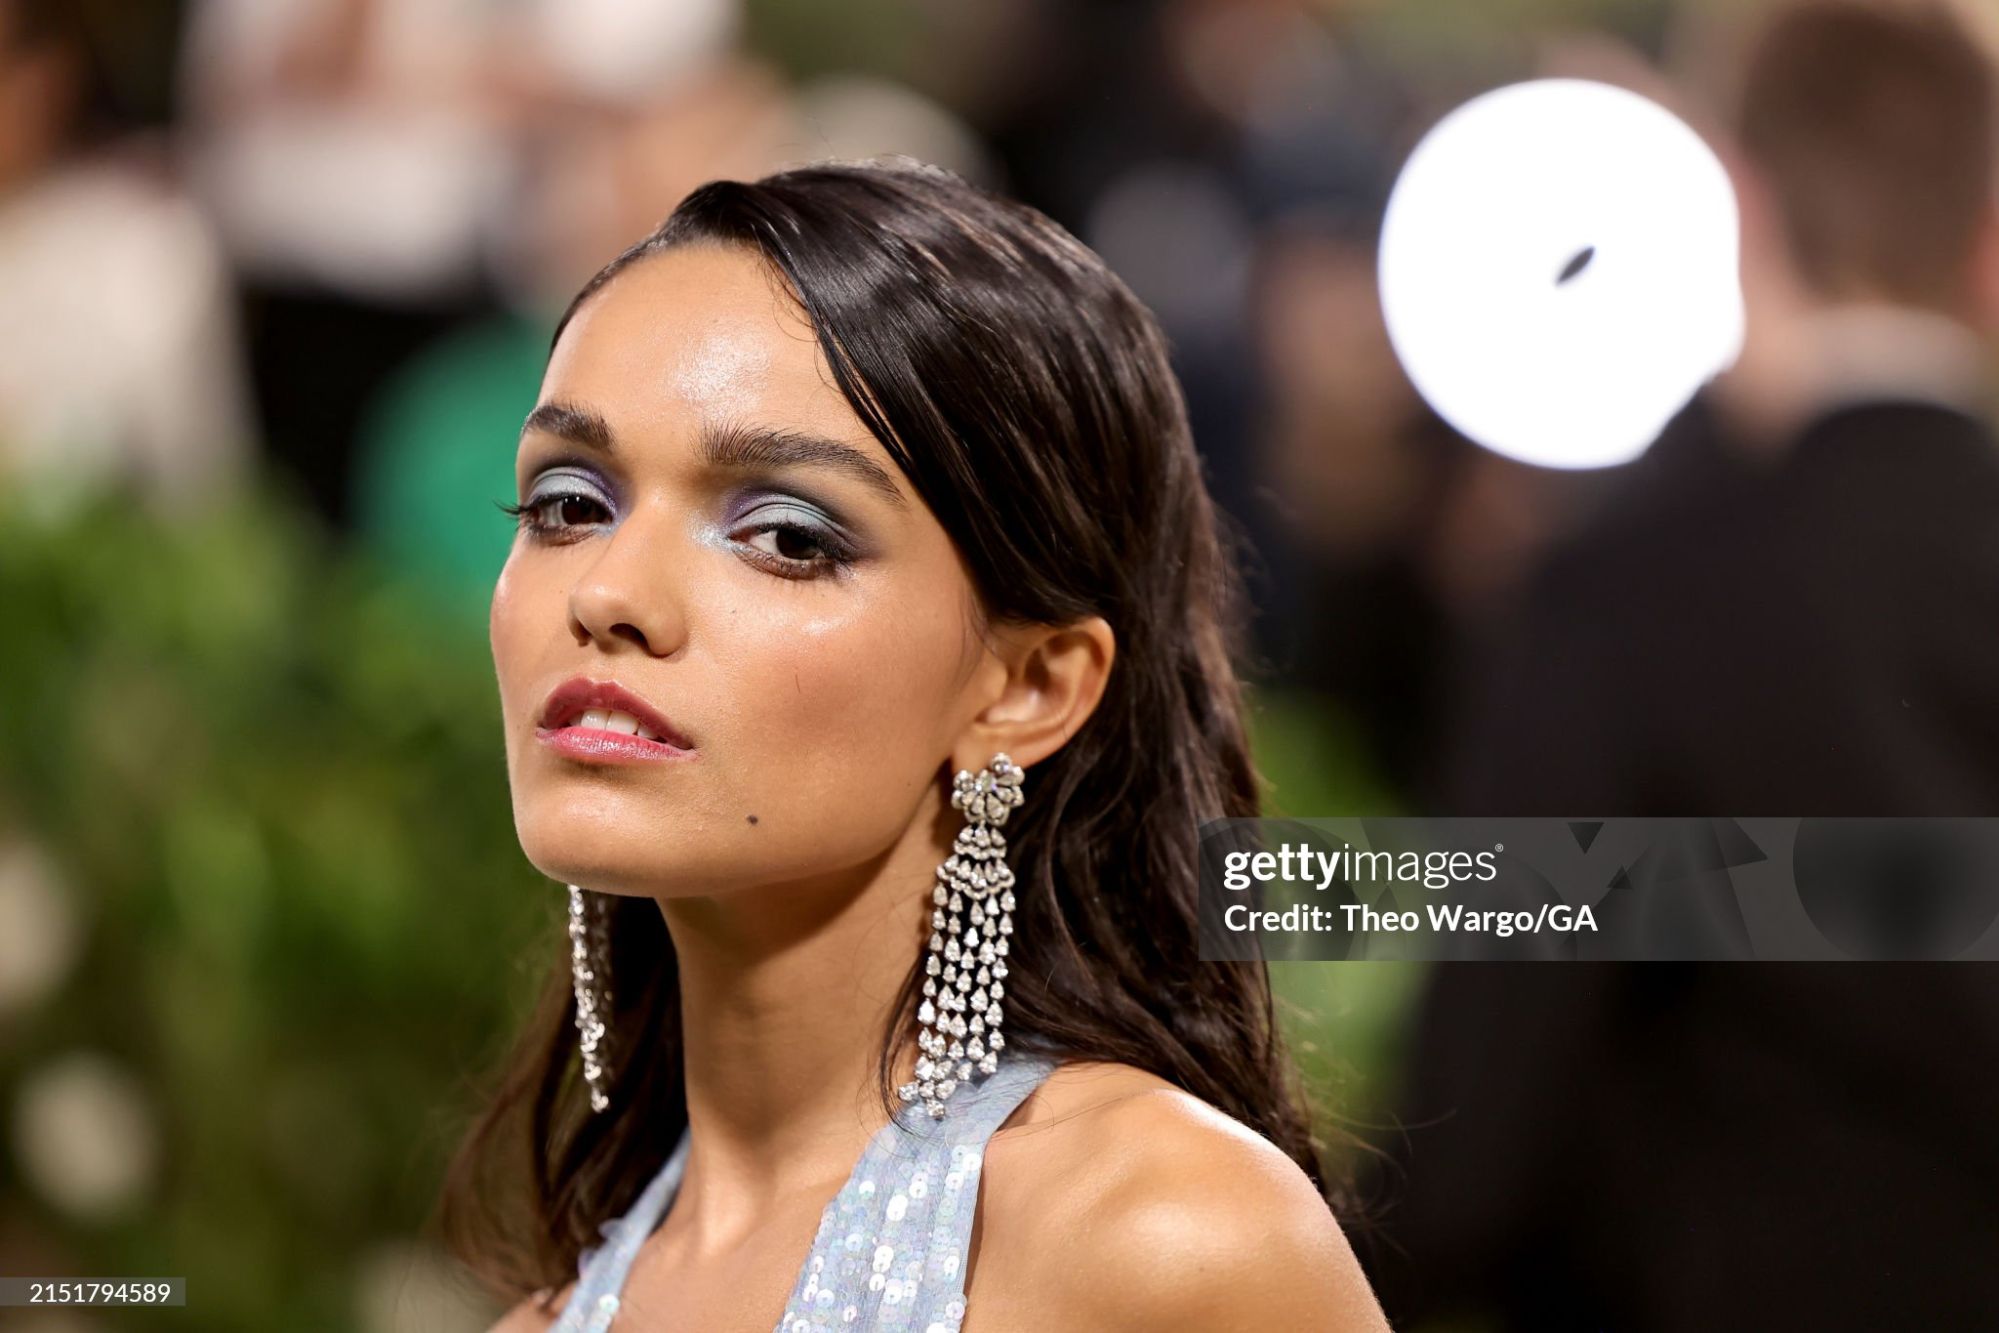 gettyimages-2151794589-2048x2048.jpg